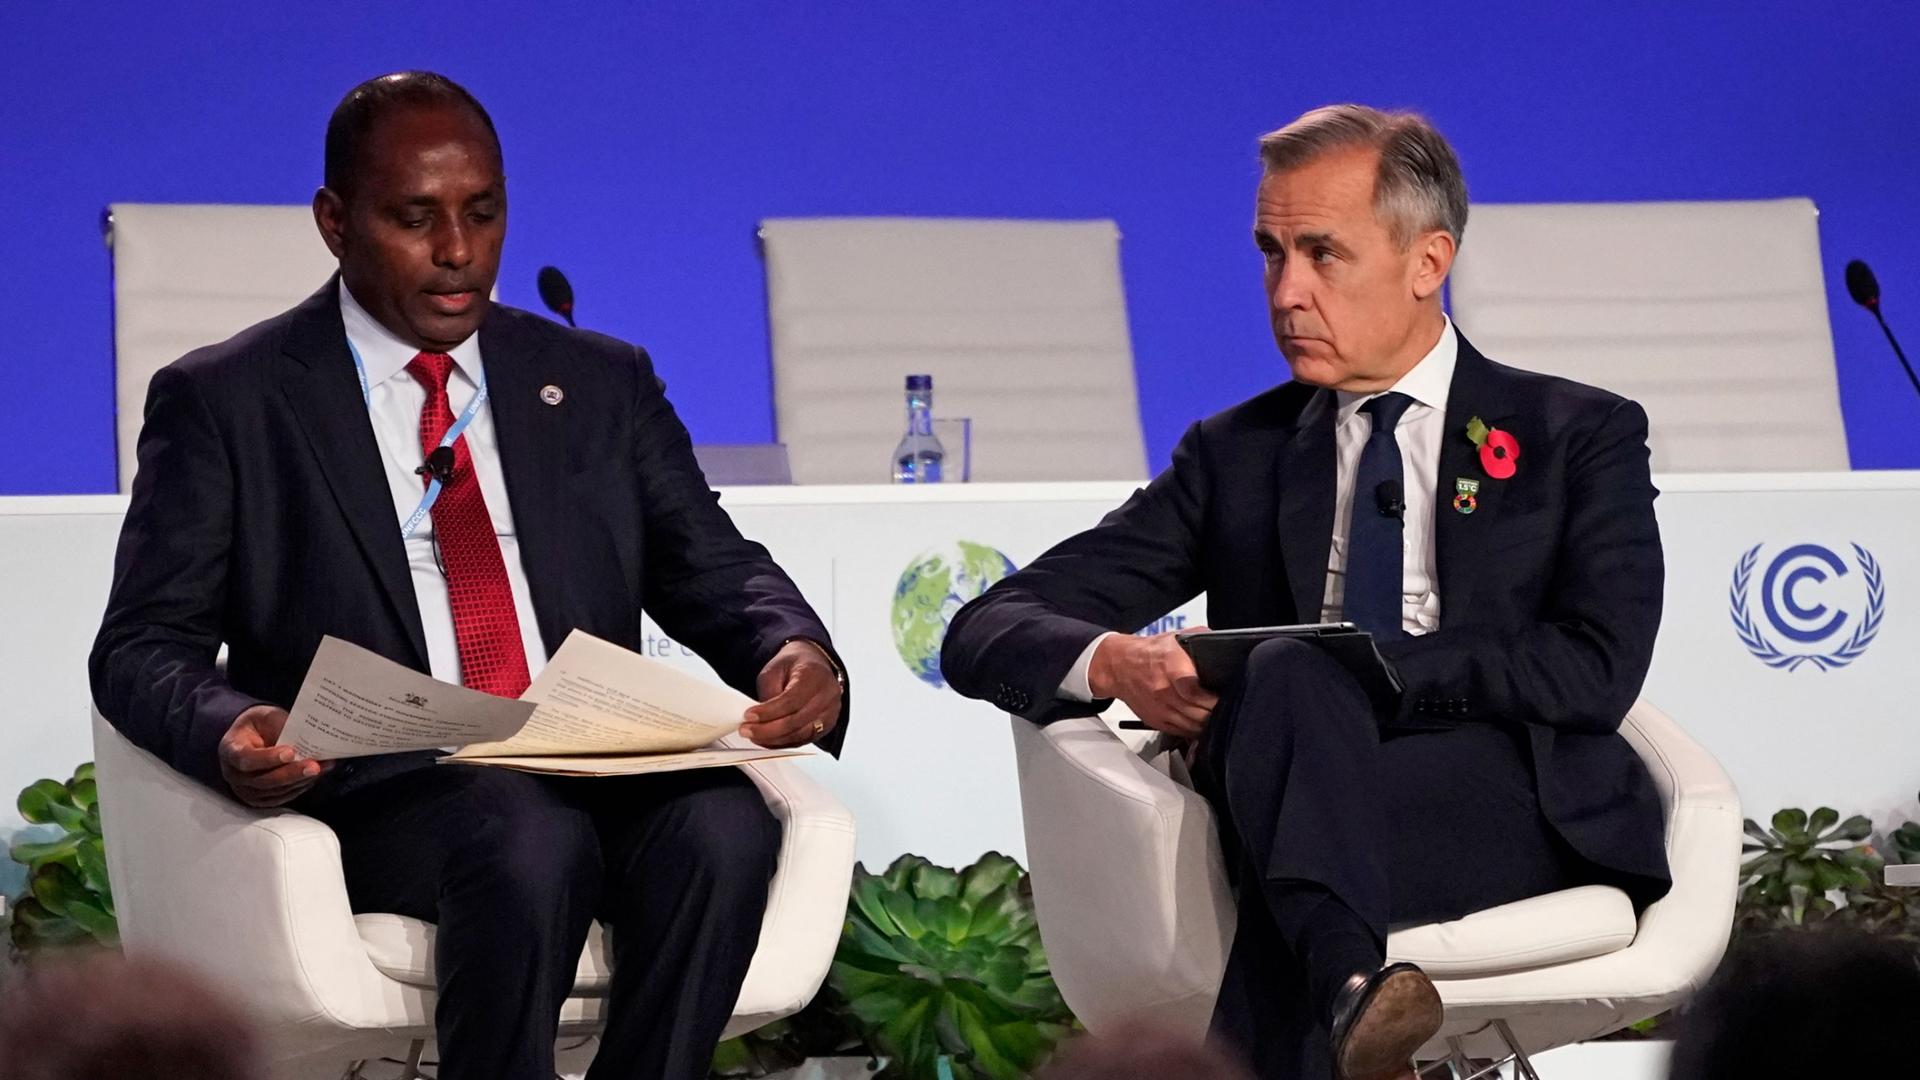 Kenyan Treasury Cabinet Secretary Ukur Yatani, left, and Mark Carney, the British Prime Minister Boris Johnson's Finance Adviser for COP26 and the UN Special Envoy for Climate Action and Finance sit on stage at the COP26 UN Climate Summit in Glasgow, Scot